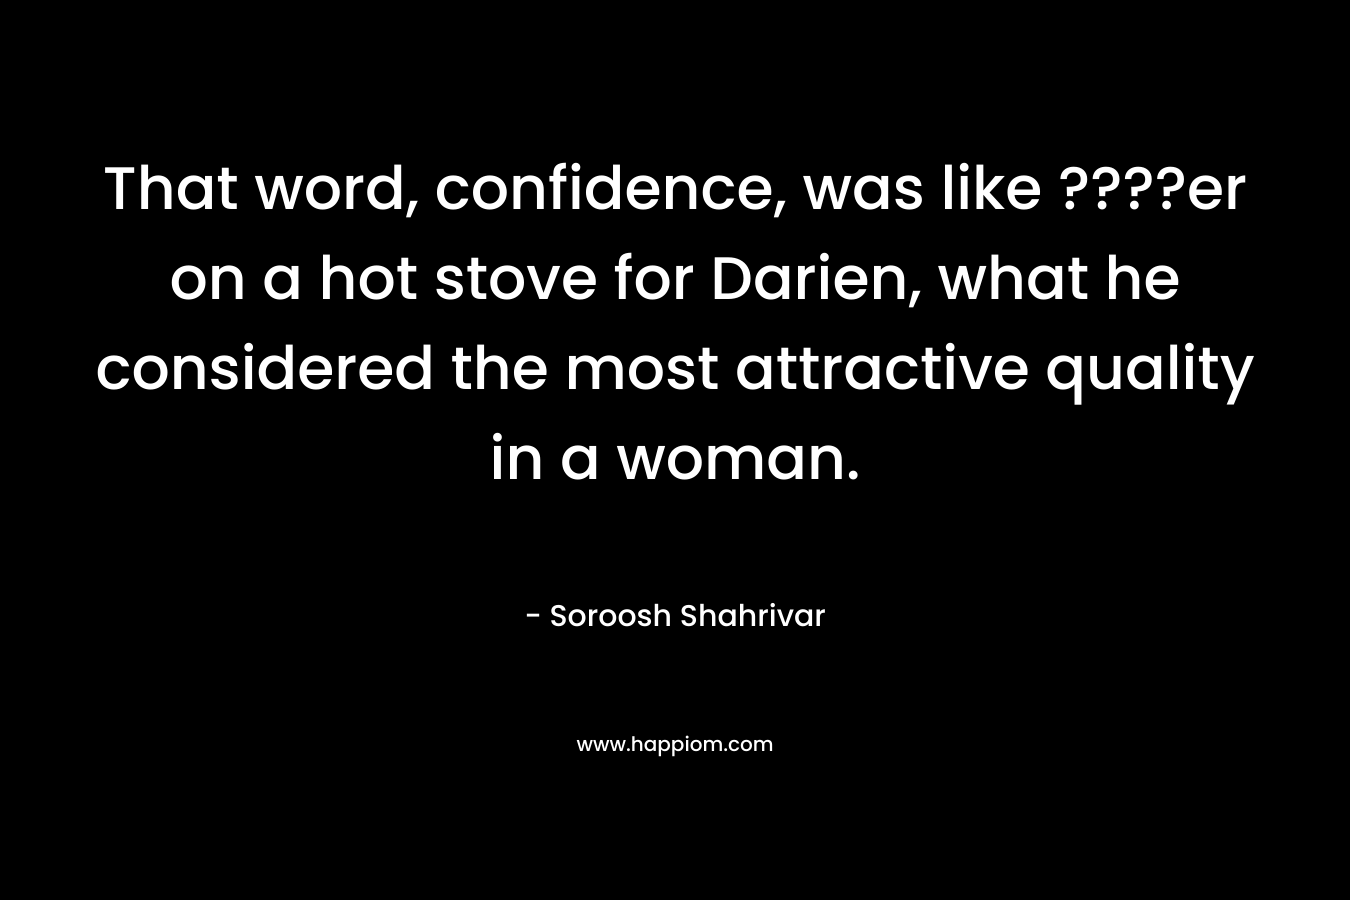 That word, confidence, was like ????er on a hot stove for Darien, what he considered the most attractive quality in a woman. – Soroosh Shahrivar